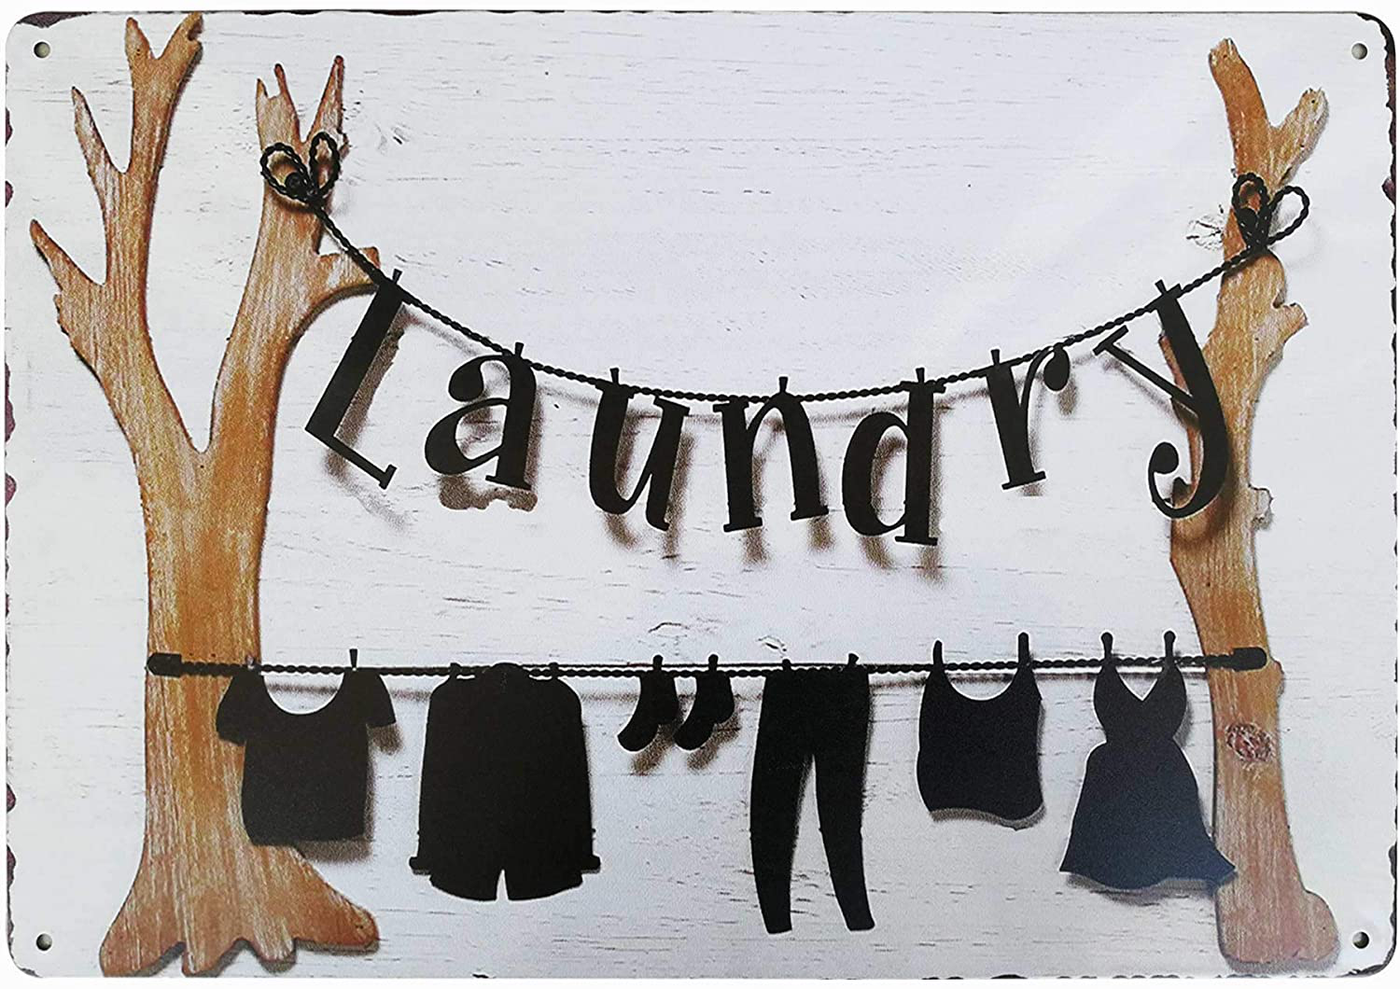 PXIYOU Novelty Dry Clothes Laundry Vintage Retro Metal Sign Home Bathroom Laundry Room Decor Wash Room Signs Farmhouse Country Home Decor 8X12Inch